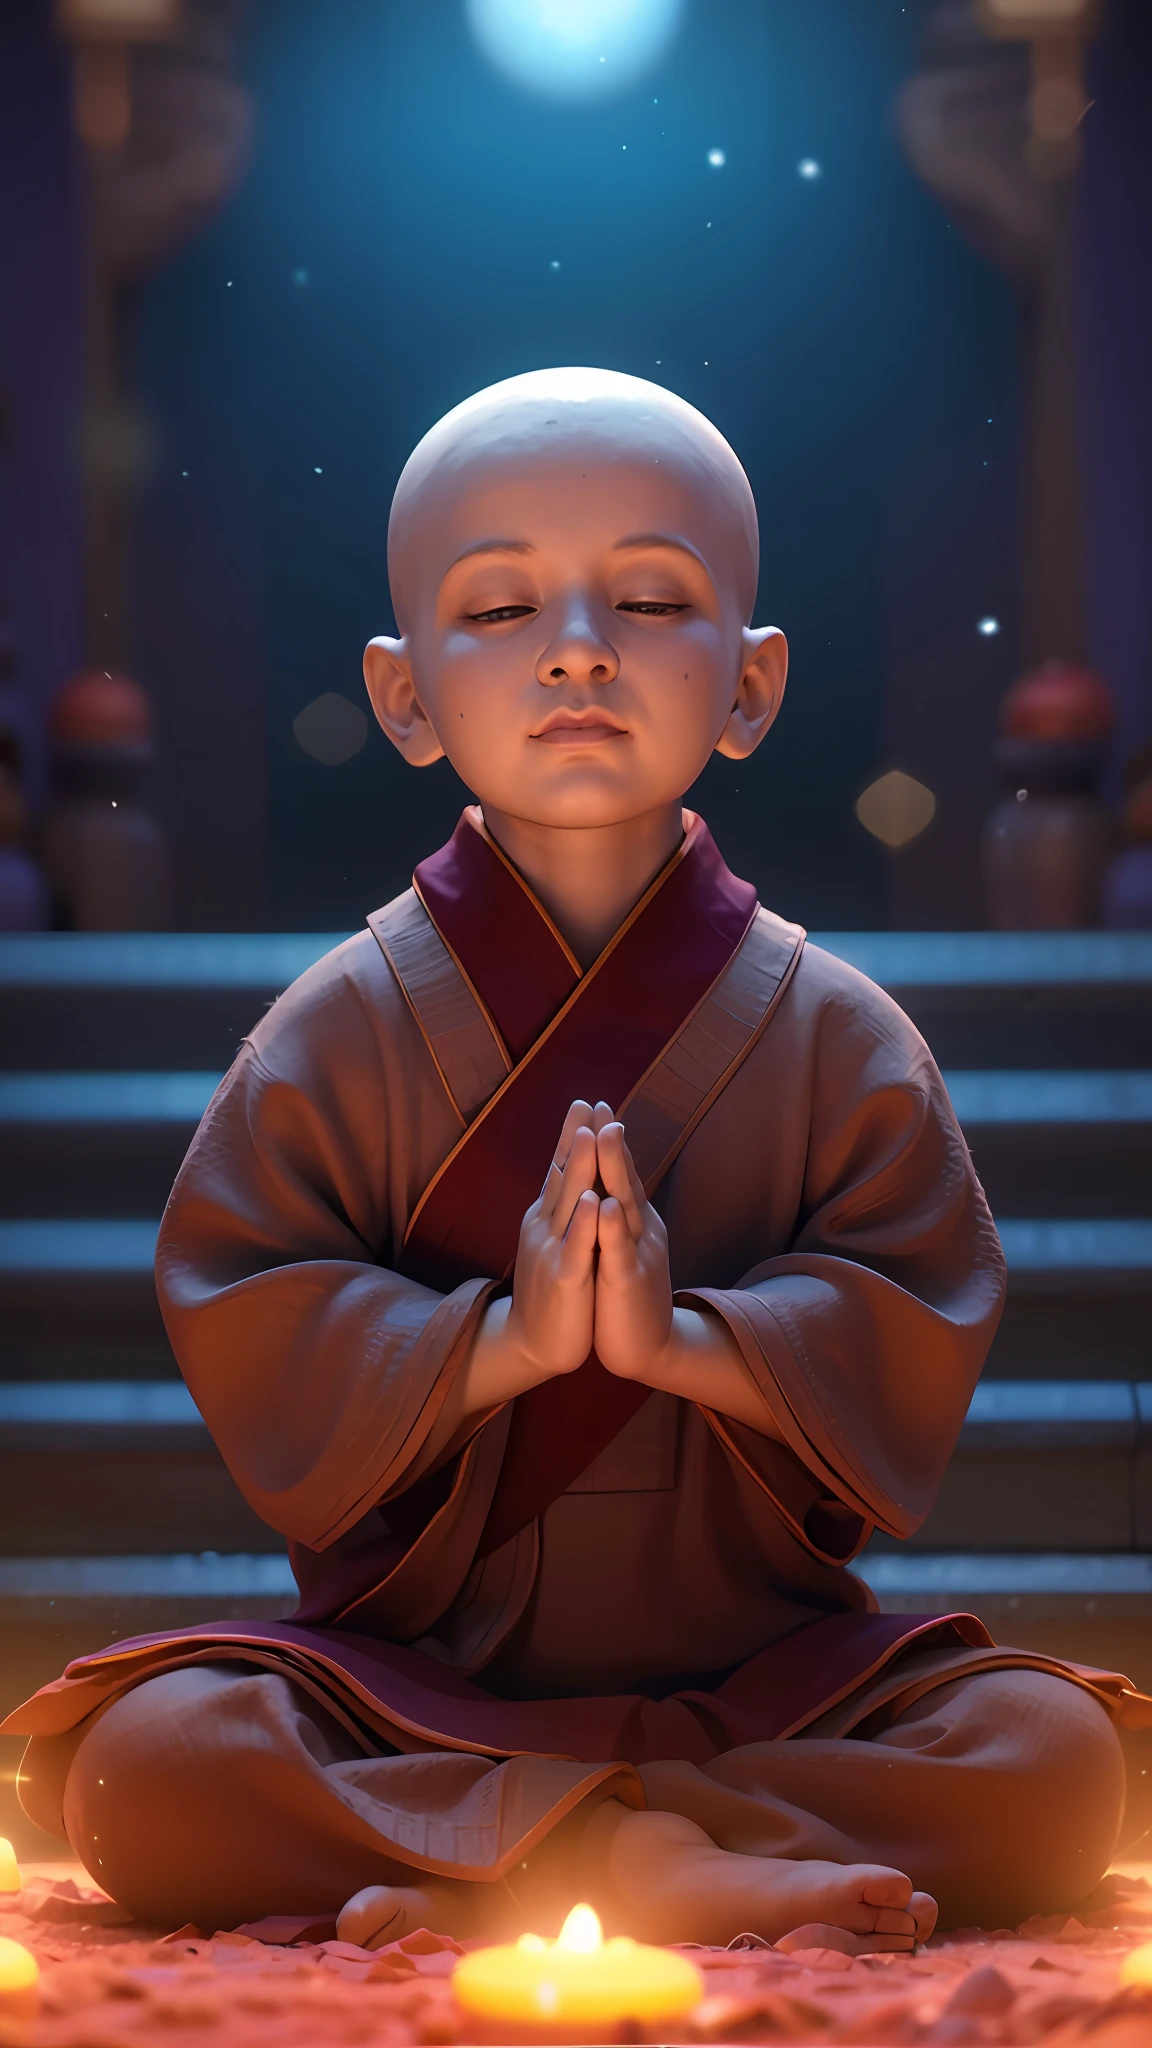 Alpha monks sit in a meditative position，There are candles in front of you, concept art of a monk, childrens art in artstation, monk meditate, Ross Tran 8 K, wojtek fus, rossdraws global illumination, Guviz-style artwork, 3 d render beeple, cute digital painting, Personagem pequeno. Unreal Engine 5